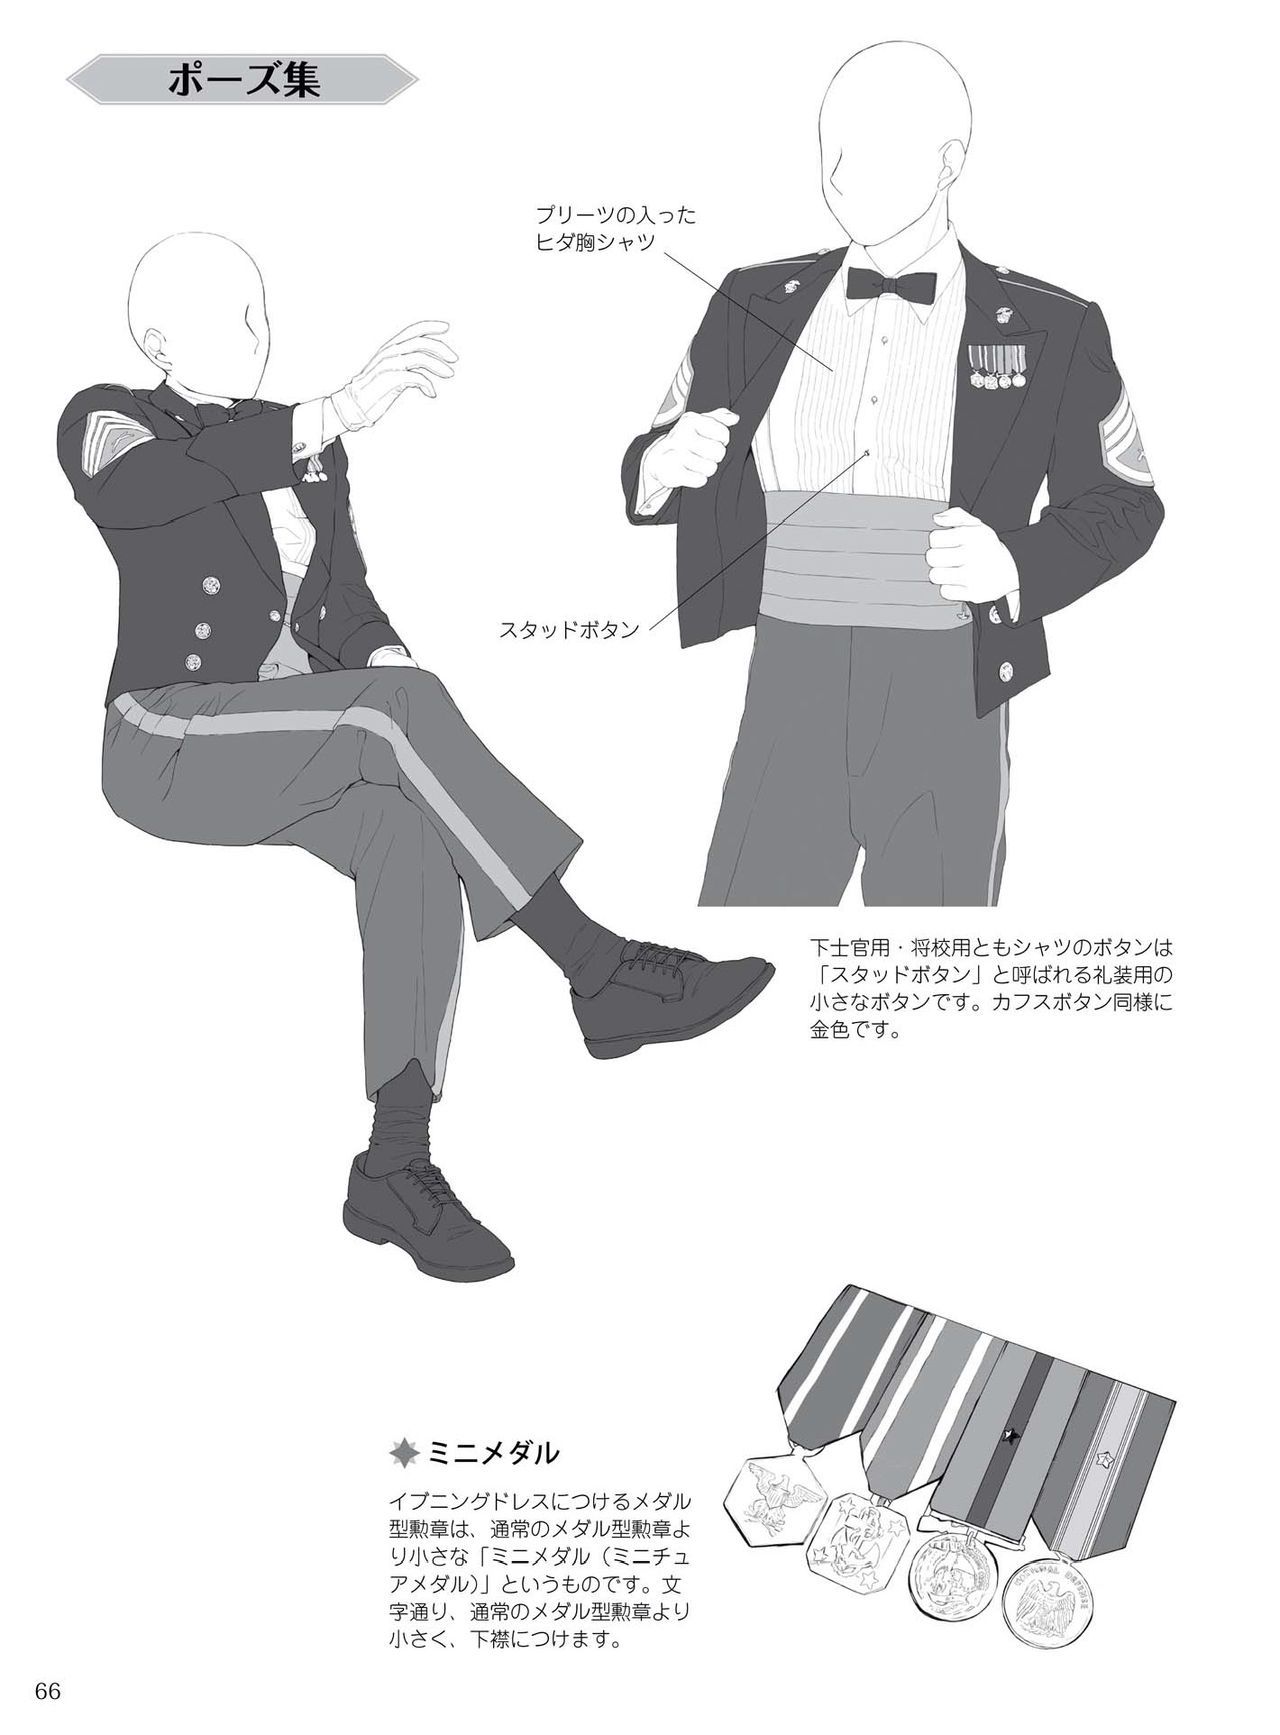 How to draw military uniforms and uniforms From Self-Defense Forces 軍服・制服の描き方 アメリカ軍・自衛隊の制服から戦闘服まで 69